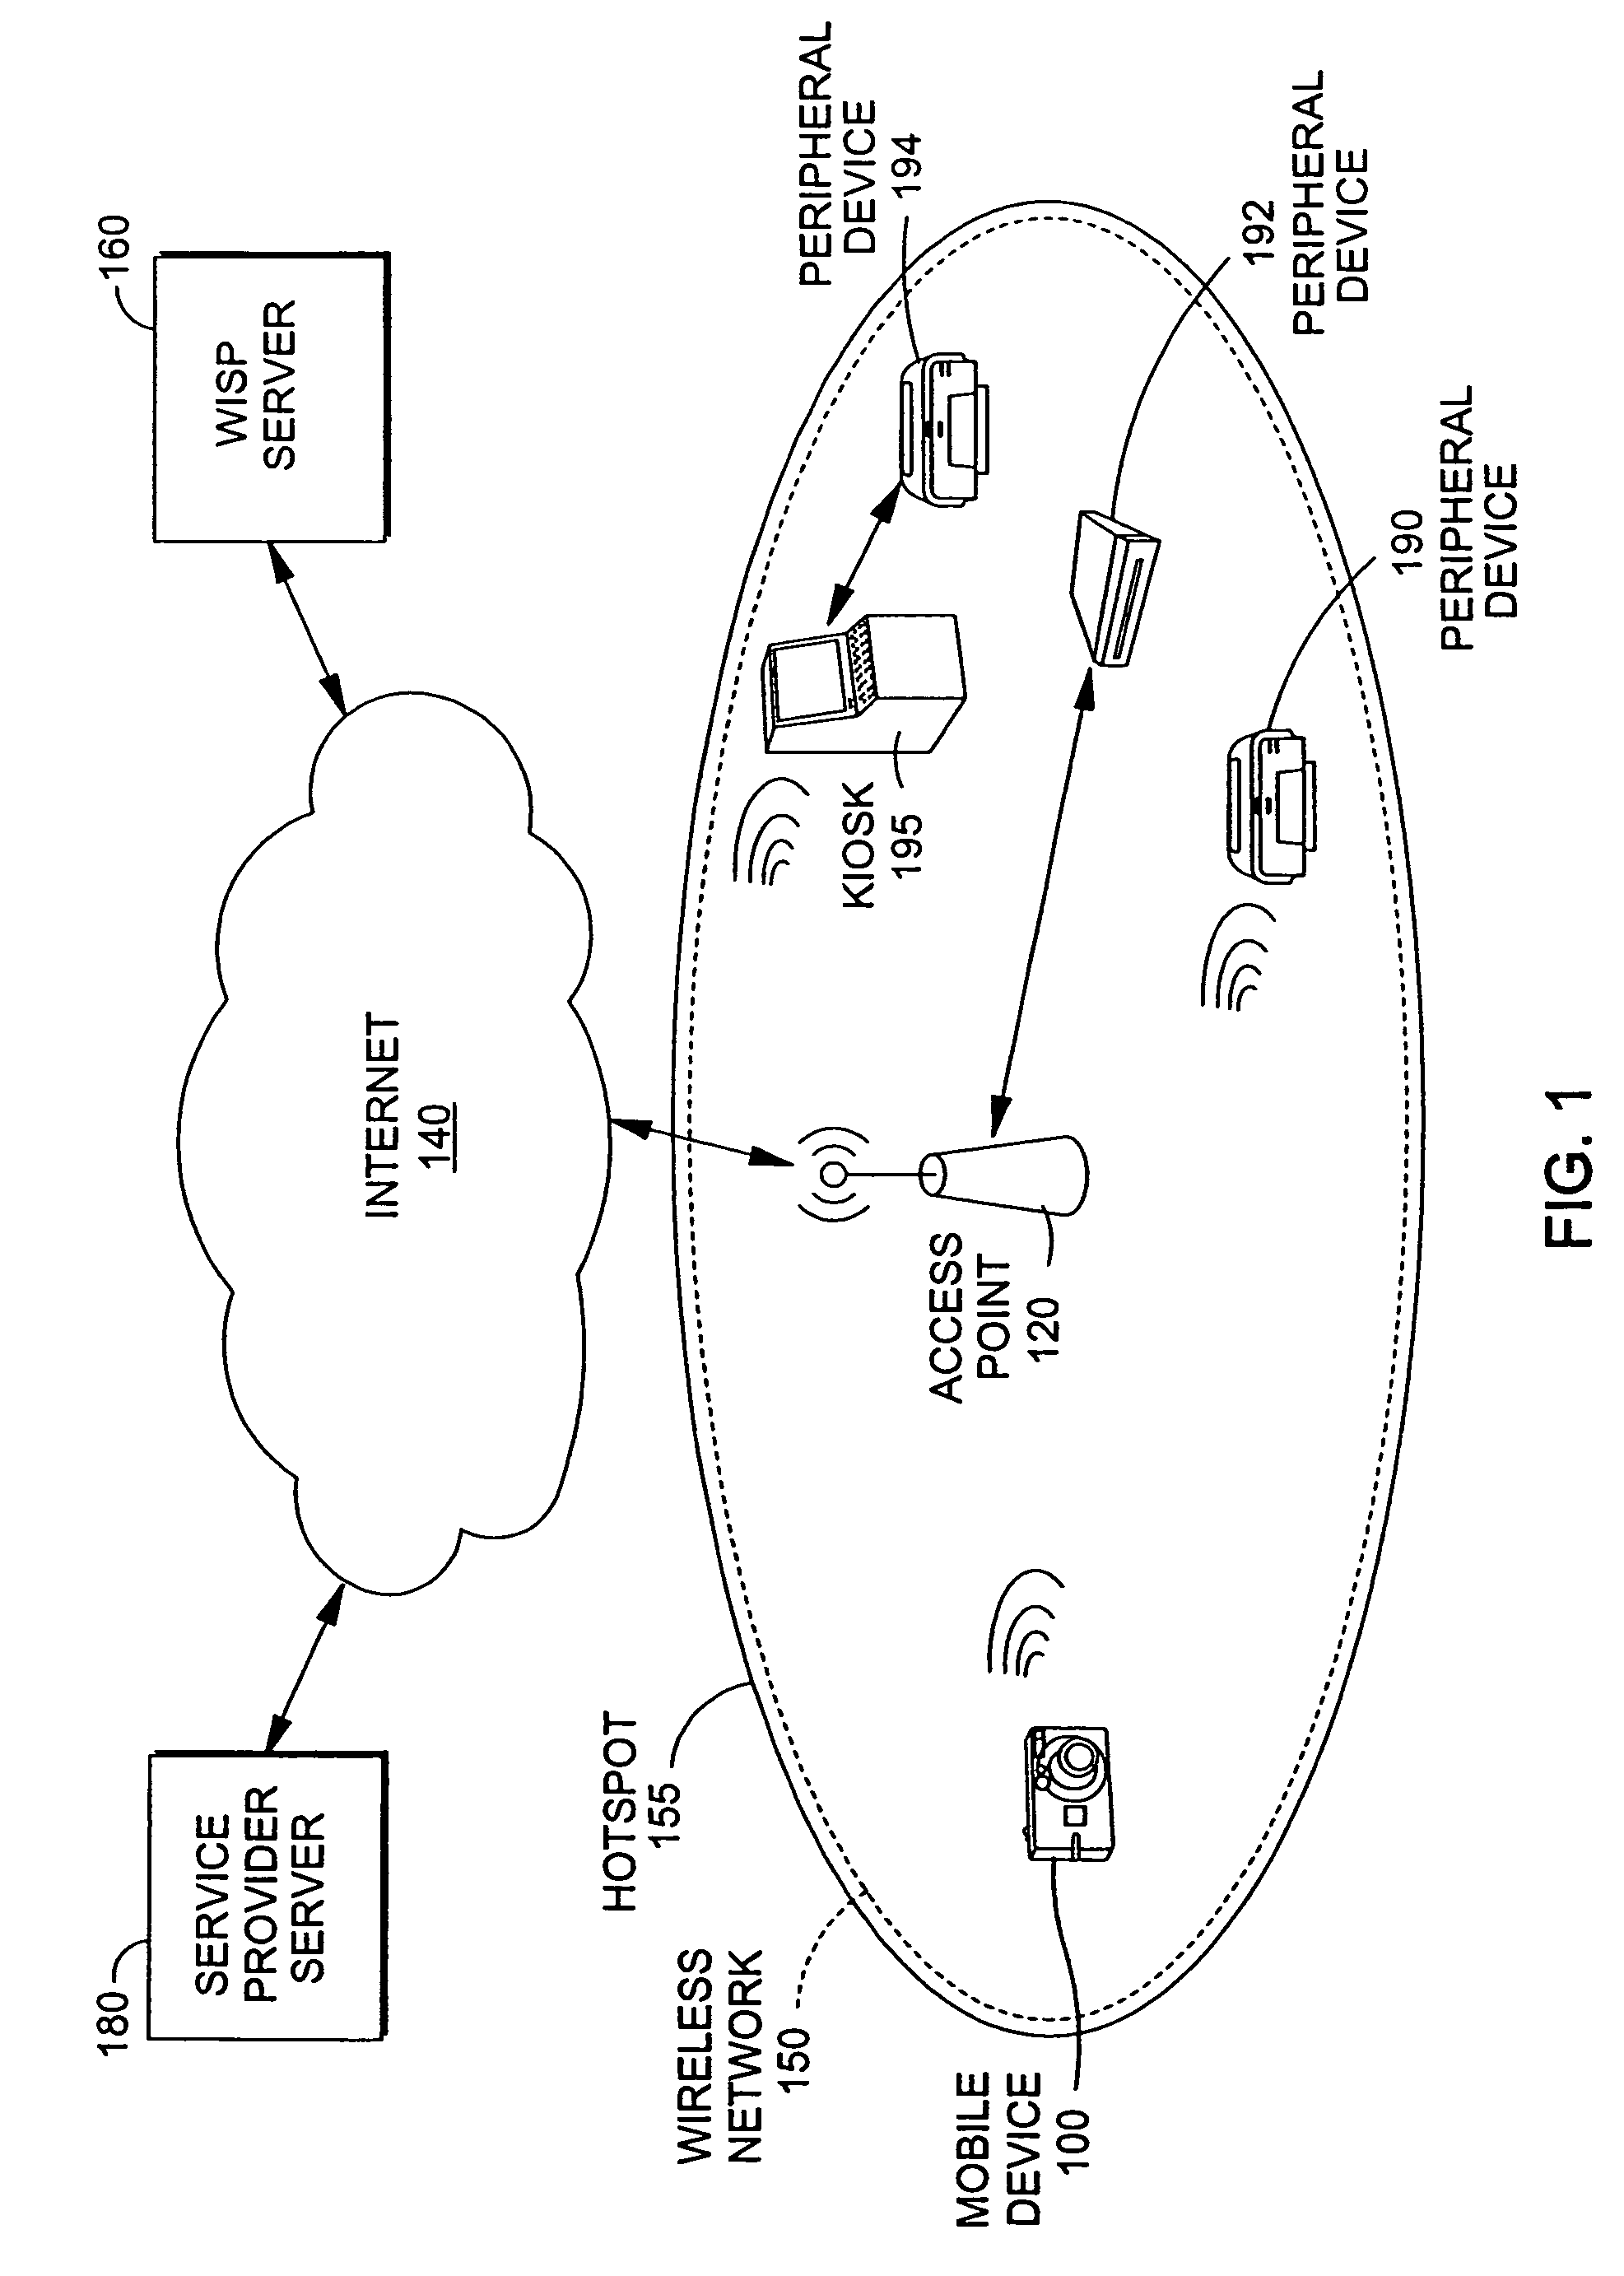 Automated wireless access to peripheral devices